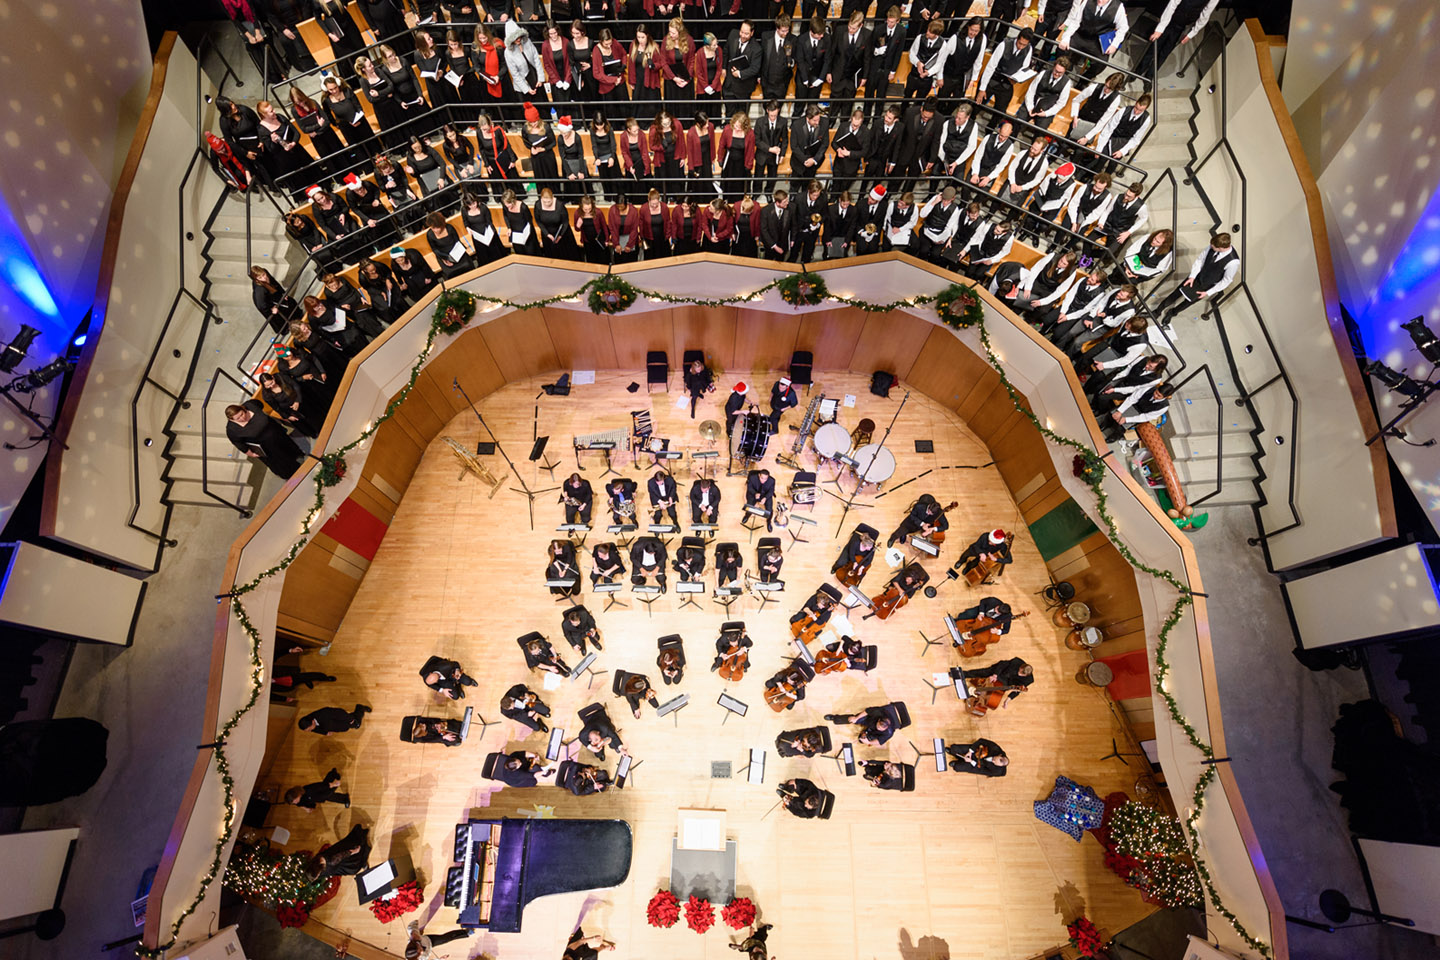 Overhead view of a full orchestra and choir performing in a concert hall